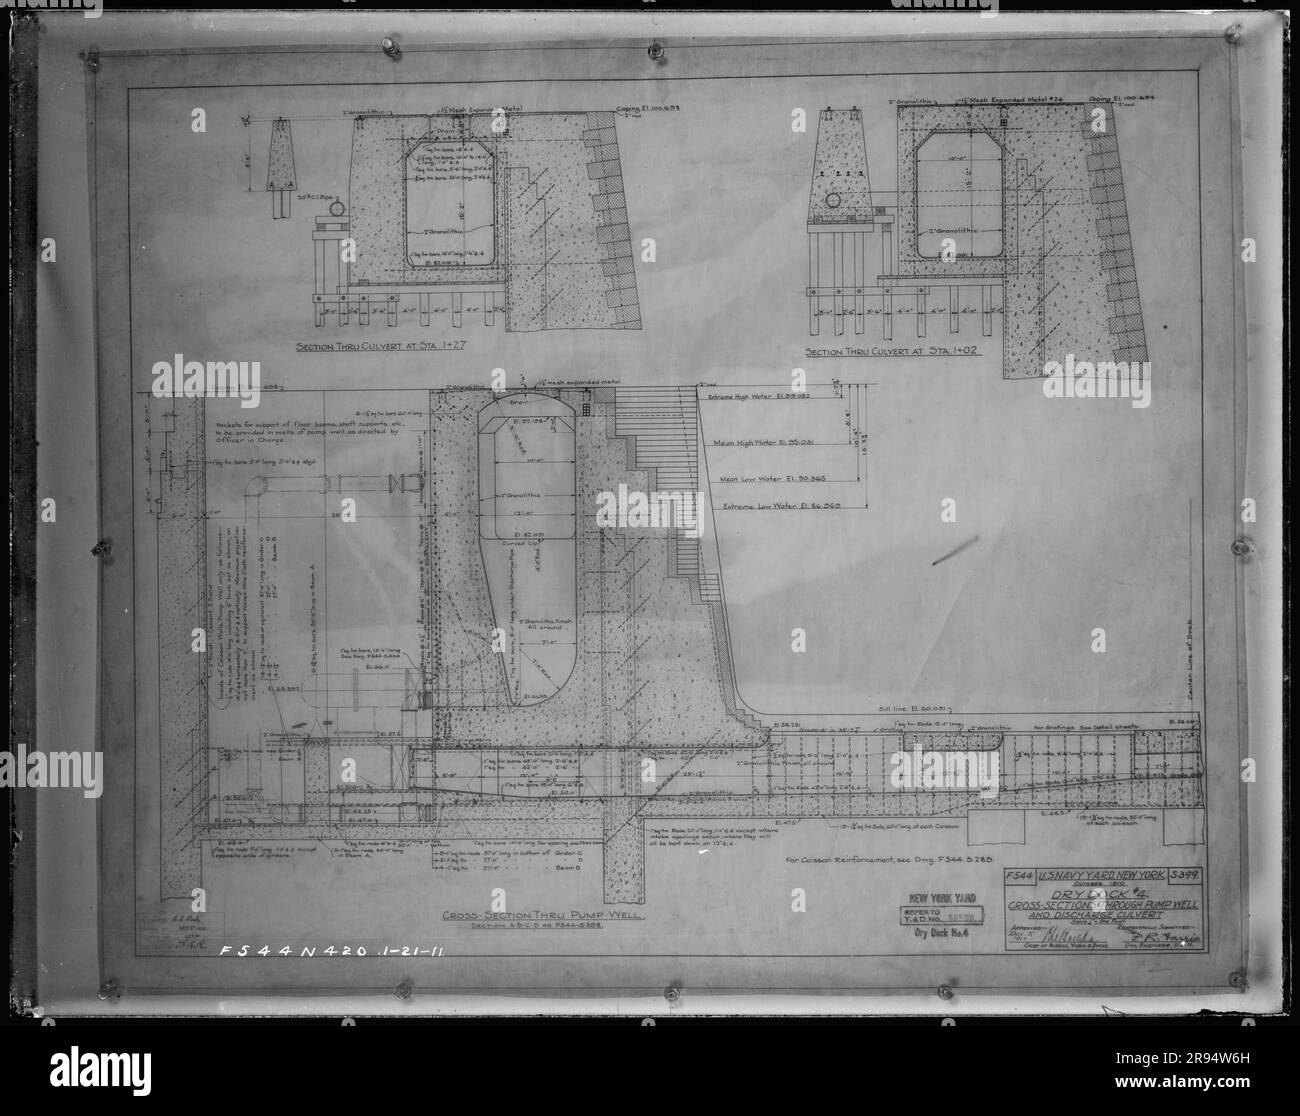 Dry Dock Number 4, Cross-Sections Through Pump Well and Discharge Culvert, Drawing F544 S399. Glass Plate Negatives of the Construction and Repair of Buildings, Facilities, and Vessels at the New York Navy Yard. Stock Photo